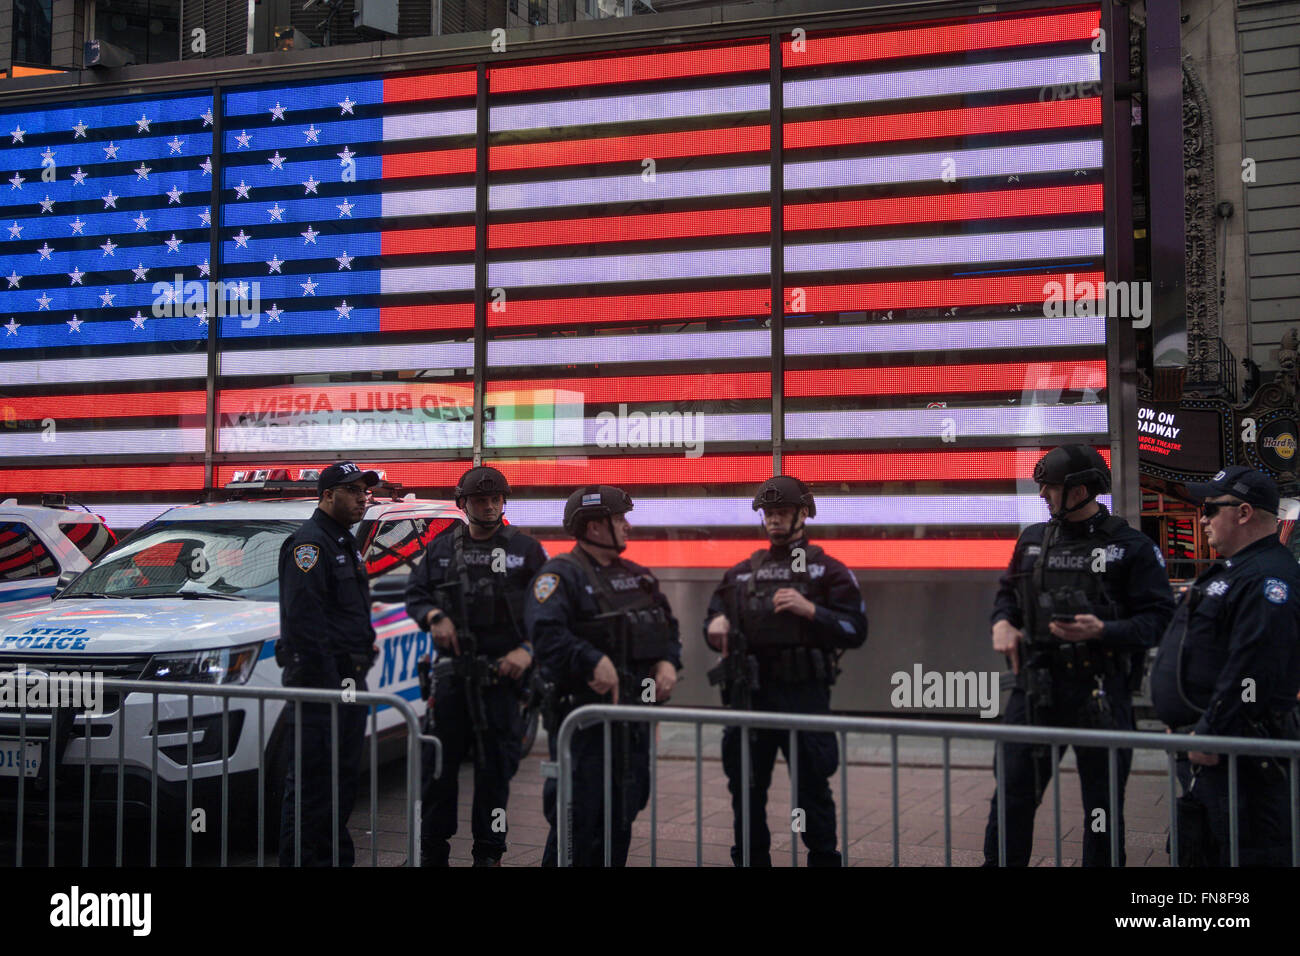 Swat Team in front of the American Flag on the U.S. Recruiting Station, Times Square, NYC Stock Photo